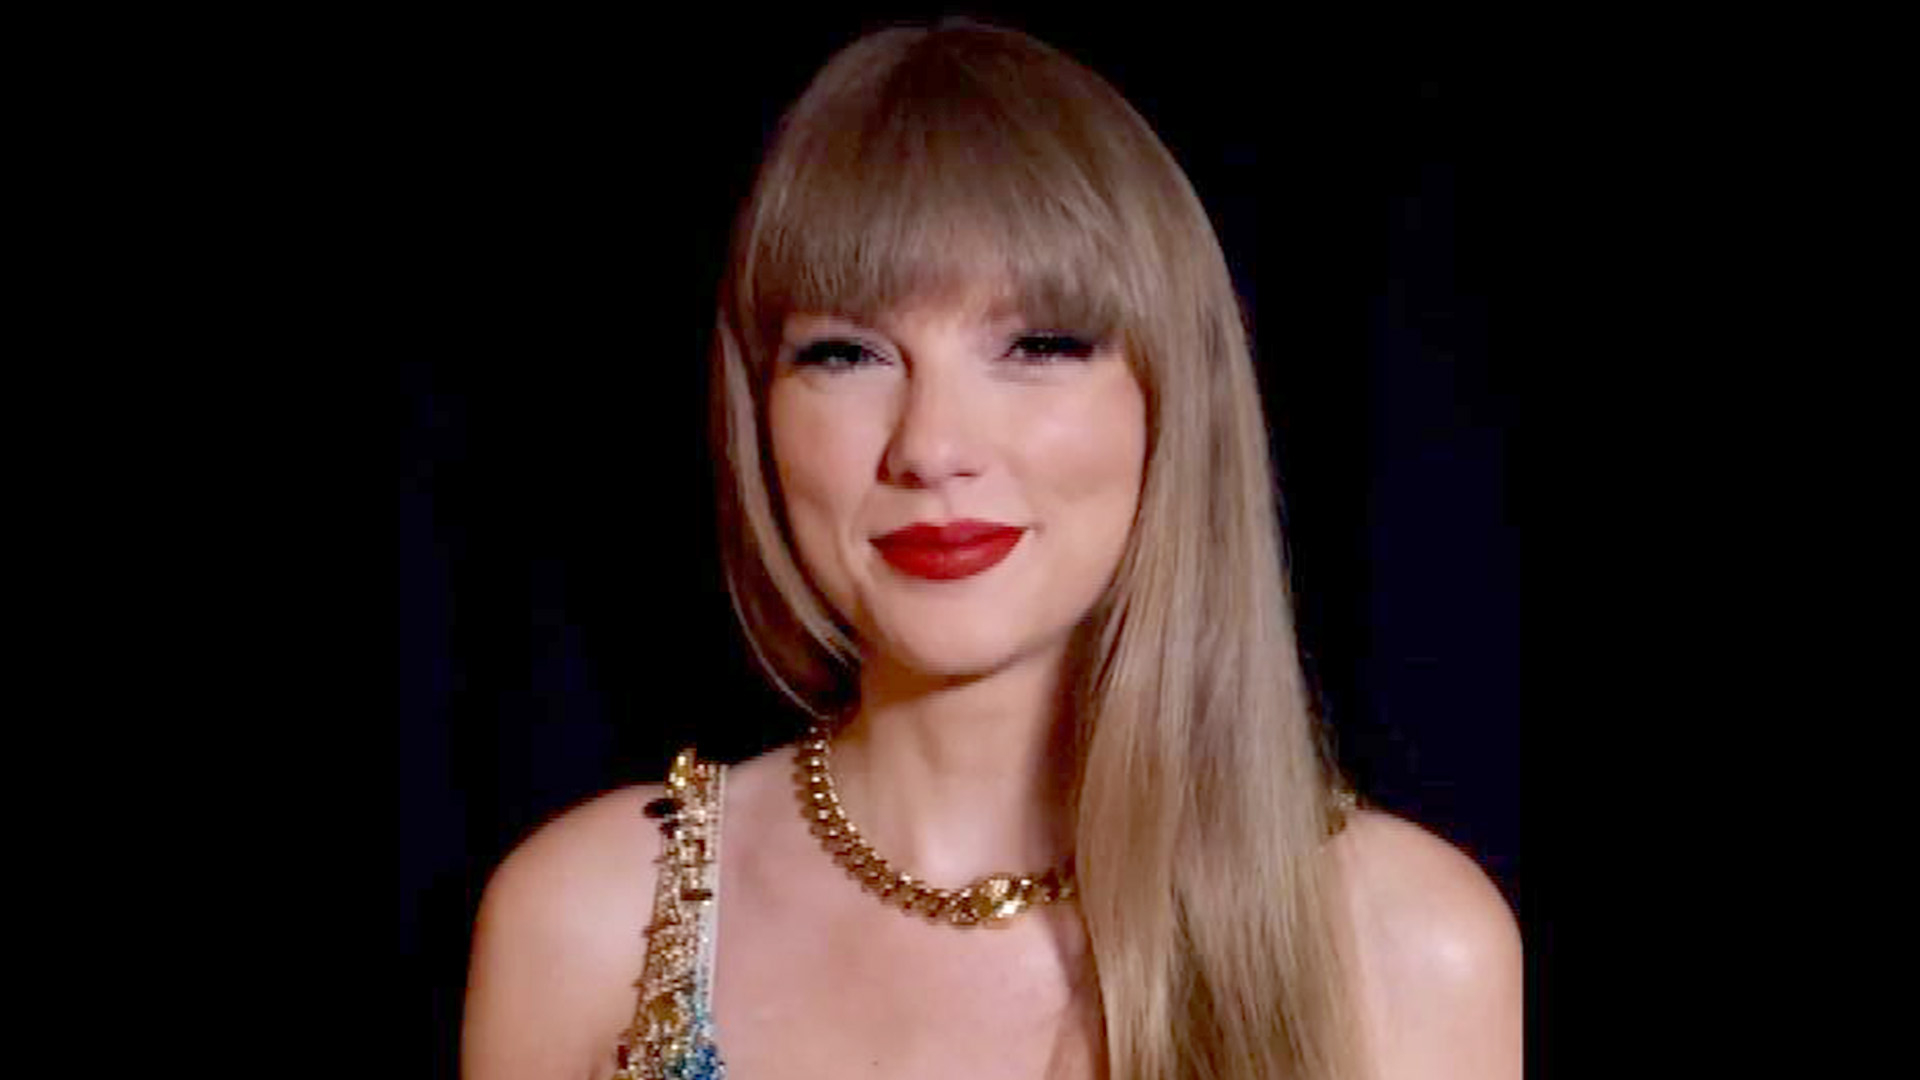 Taylor Swift breaks interview 'trust issues' with Time Magazine